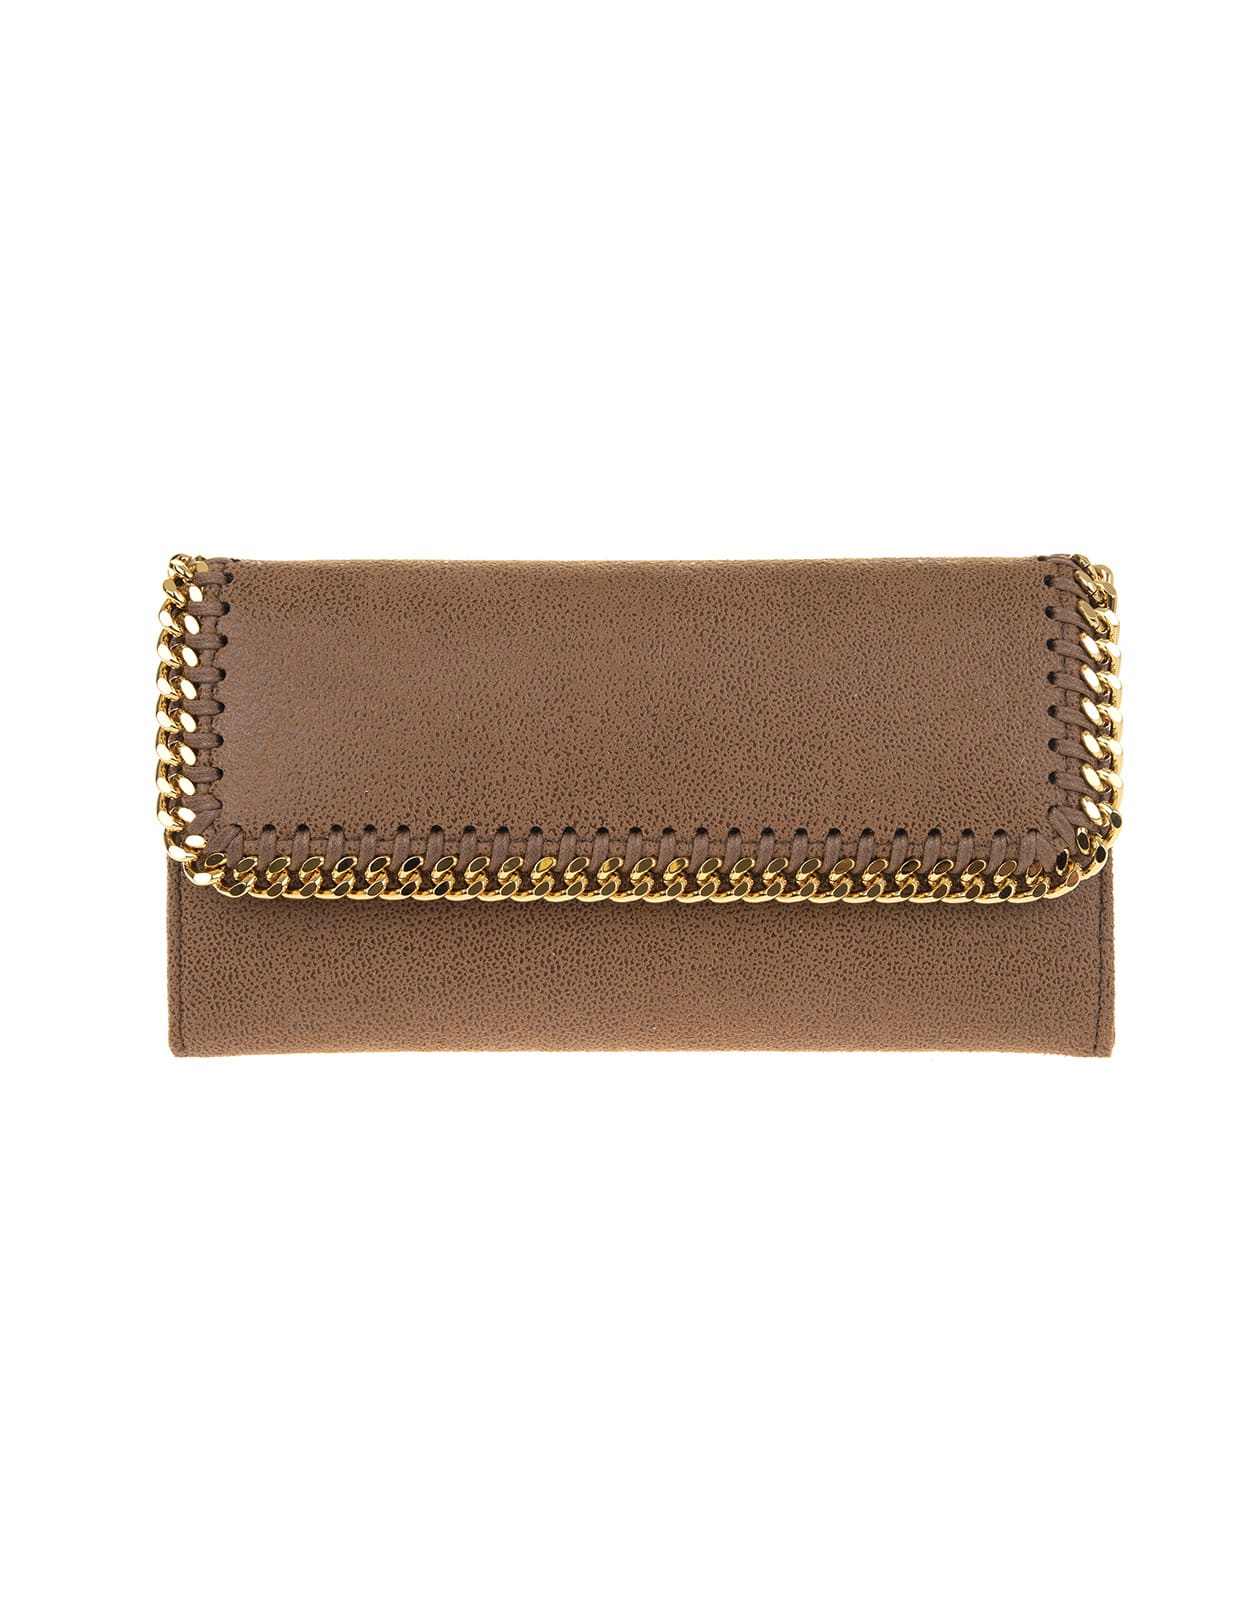 Stella McCartney Brown And Golden Continental Falabella Wallet